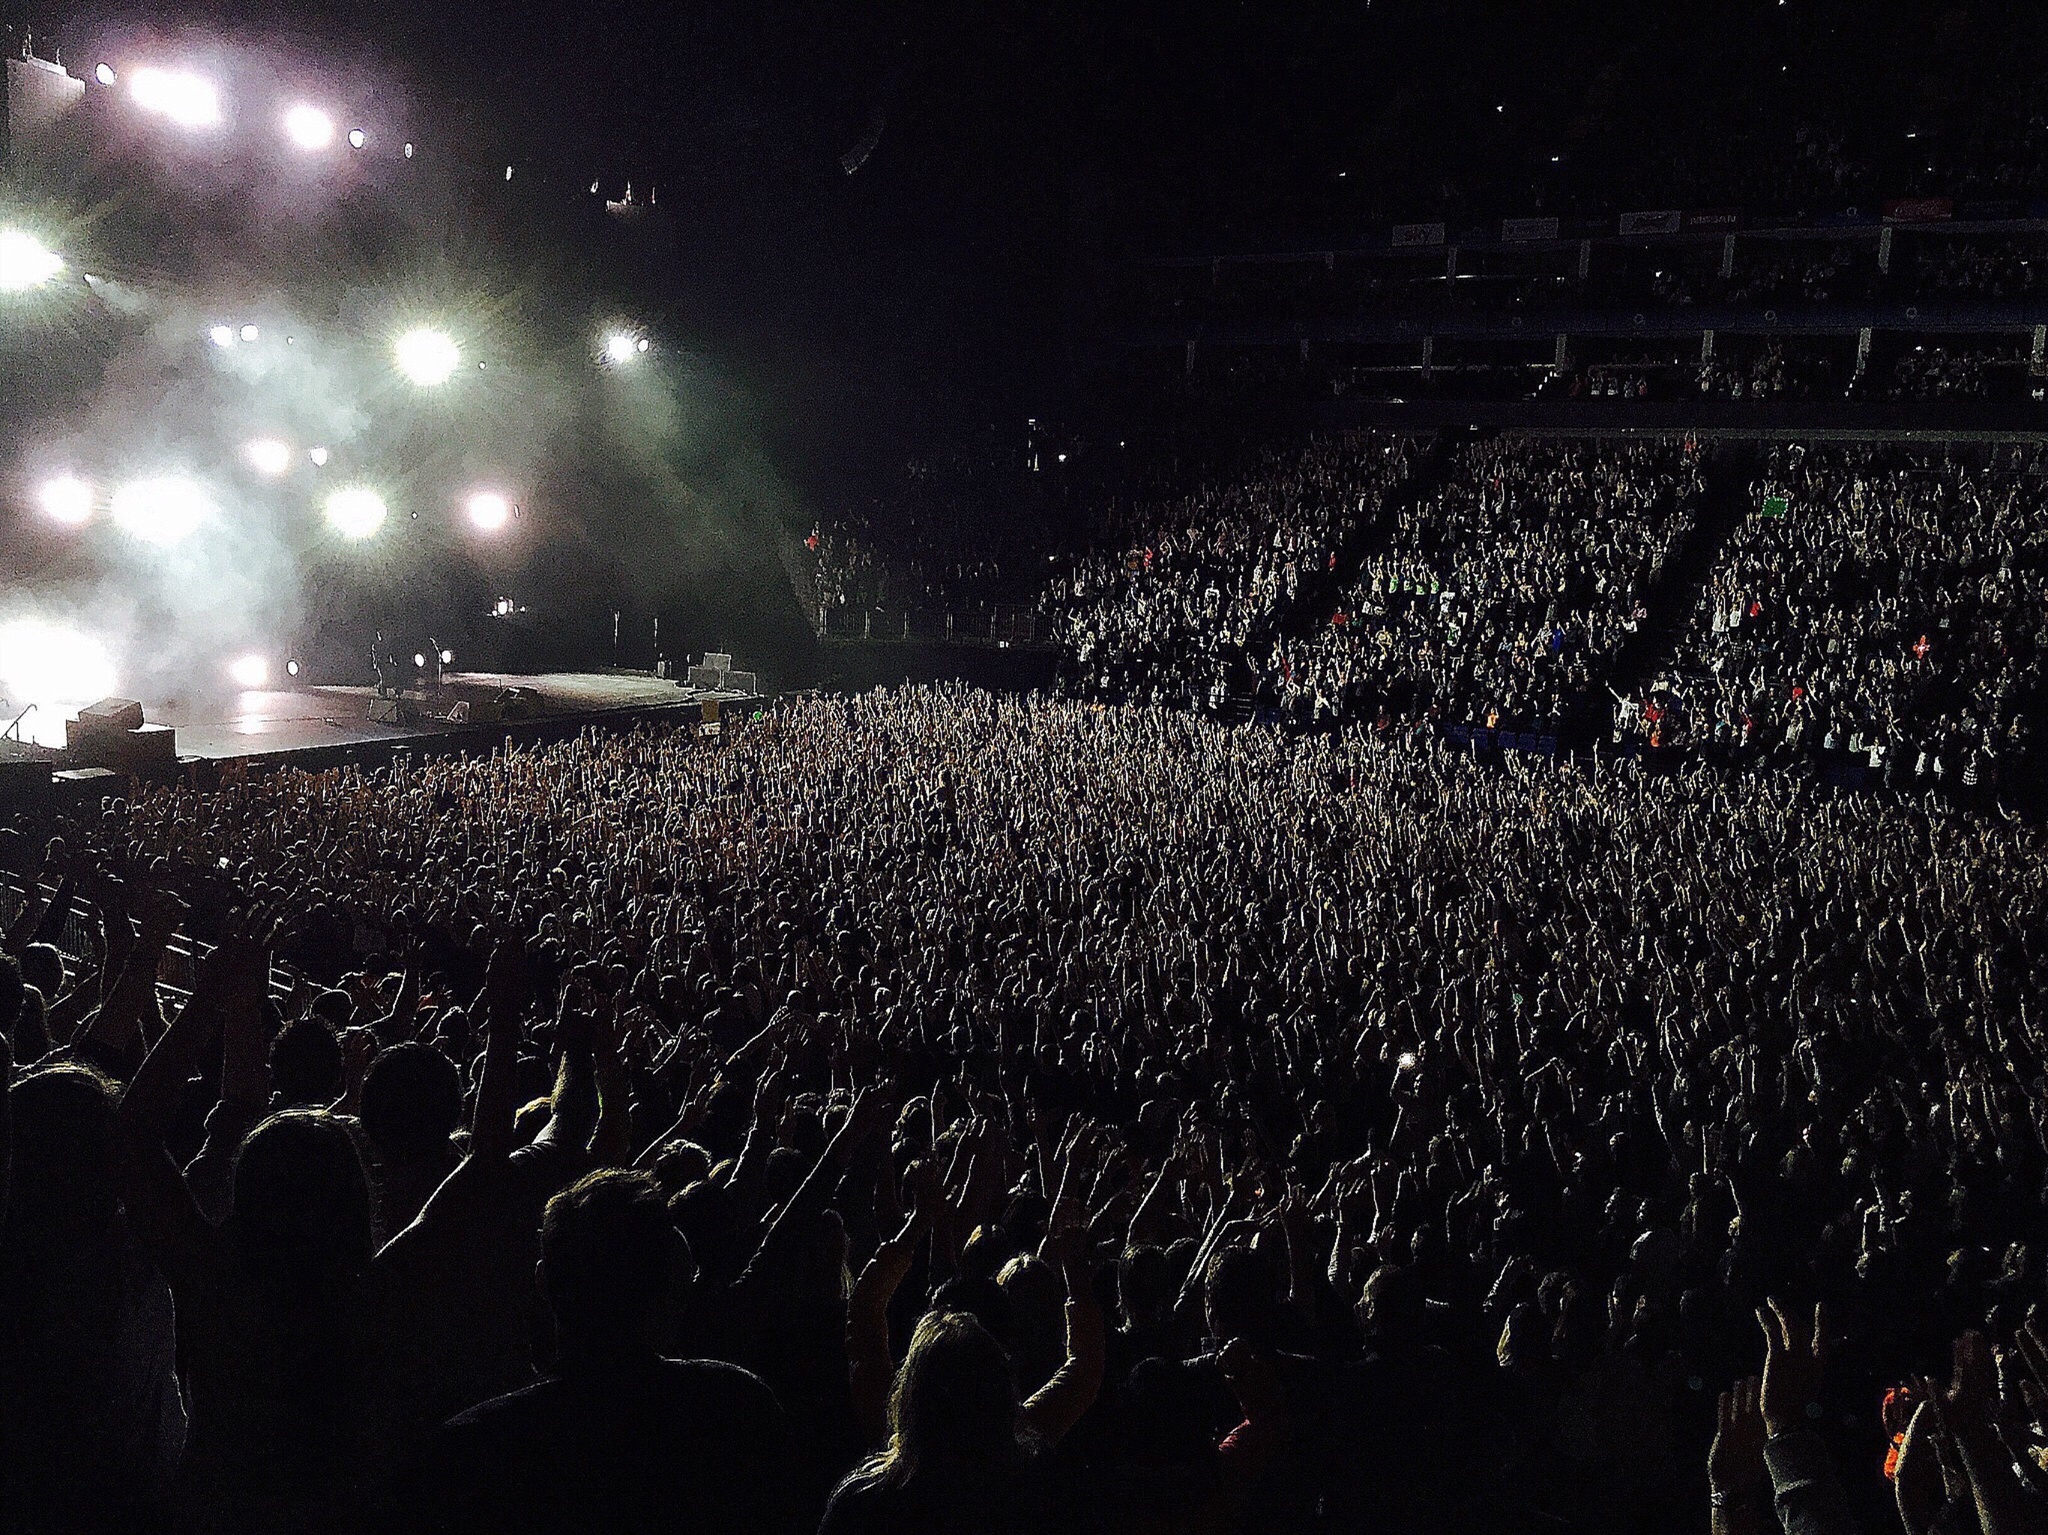 A crowd at an arena concert with a stage in front of the audience